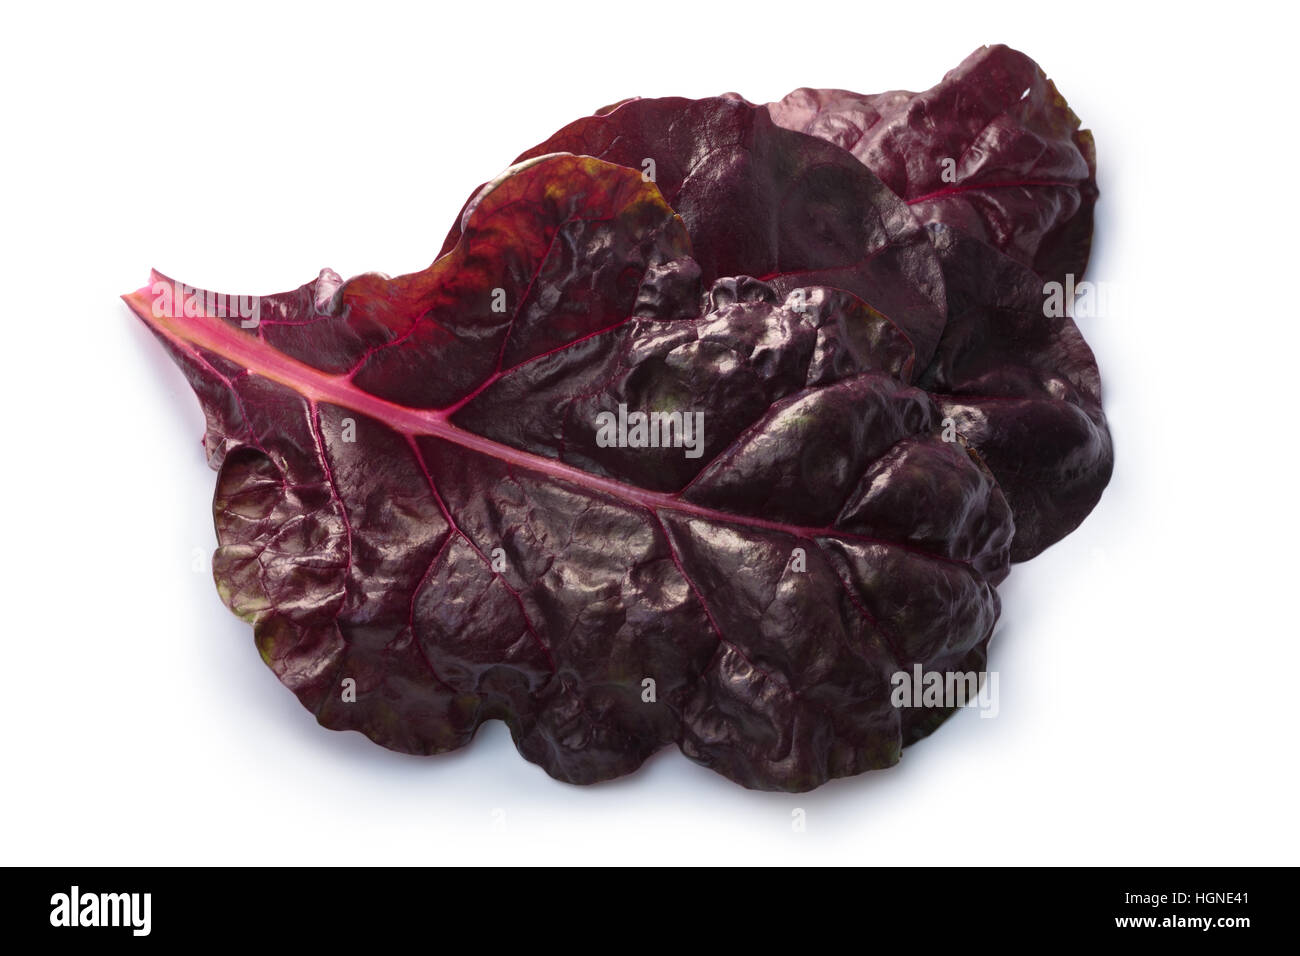 Leaves of ruby Swiss chard or Mangold (Beta vulgaris subsp. Cicla-Group). Clipping paths, shadows separated, top view, focus on foreground leaf Stock Photo